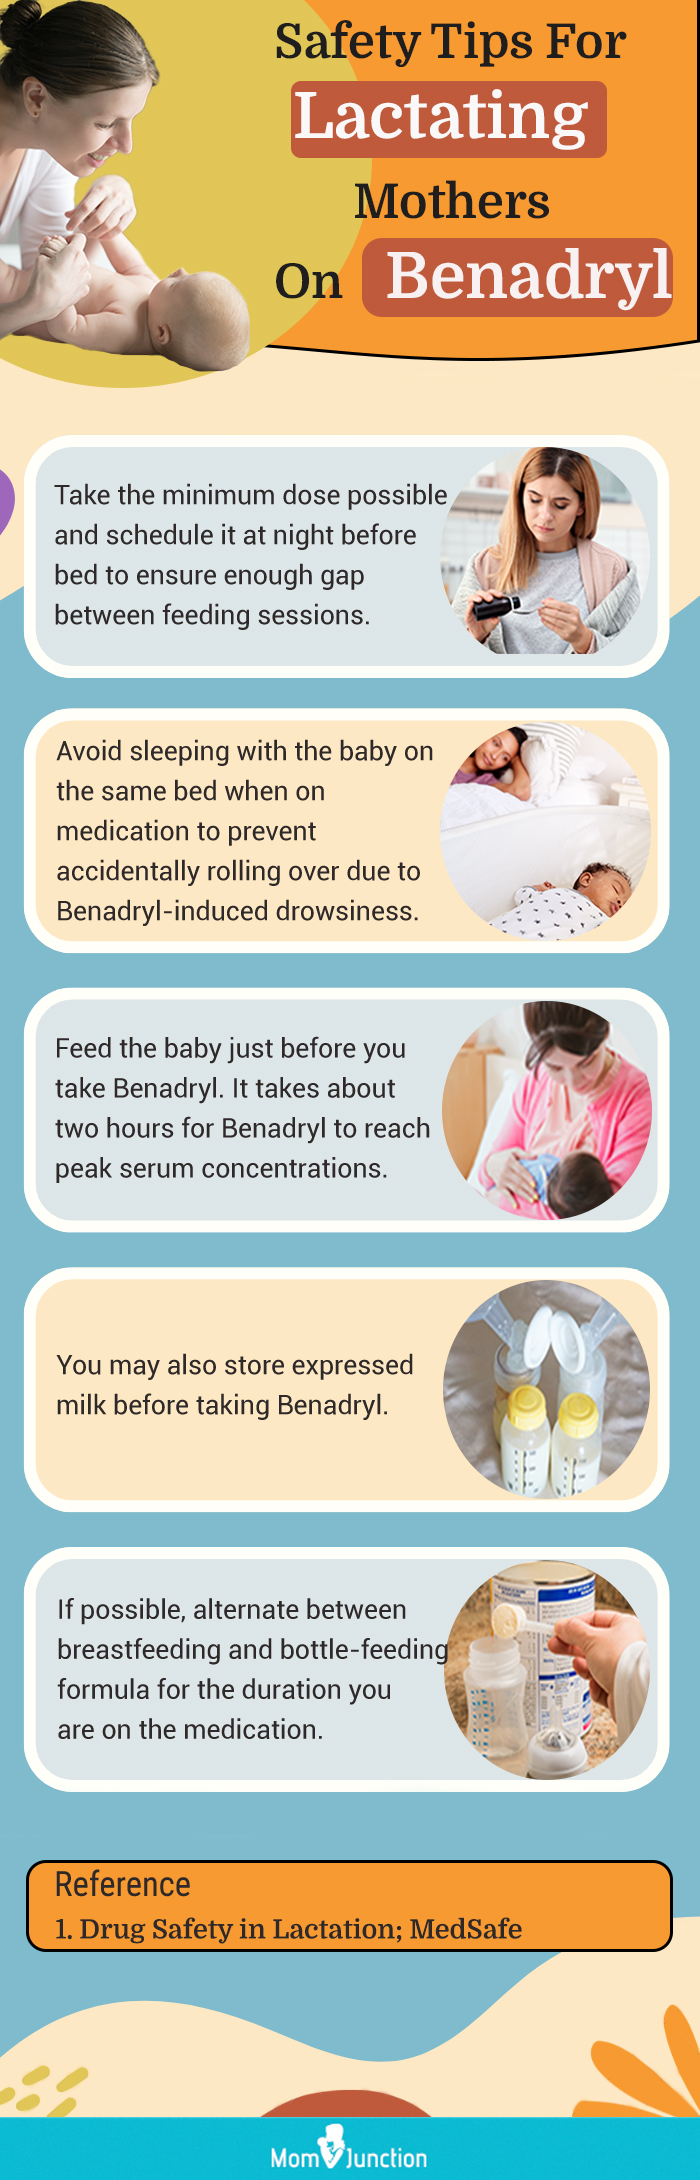 safety tips for lactating mothers on benadryl (infographic)